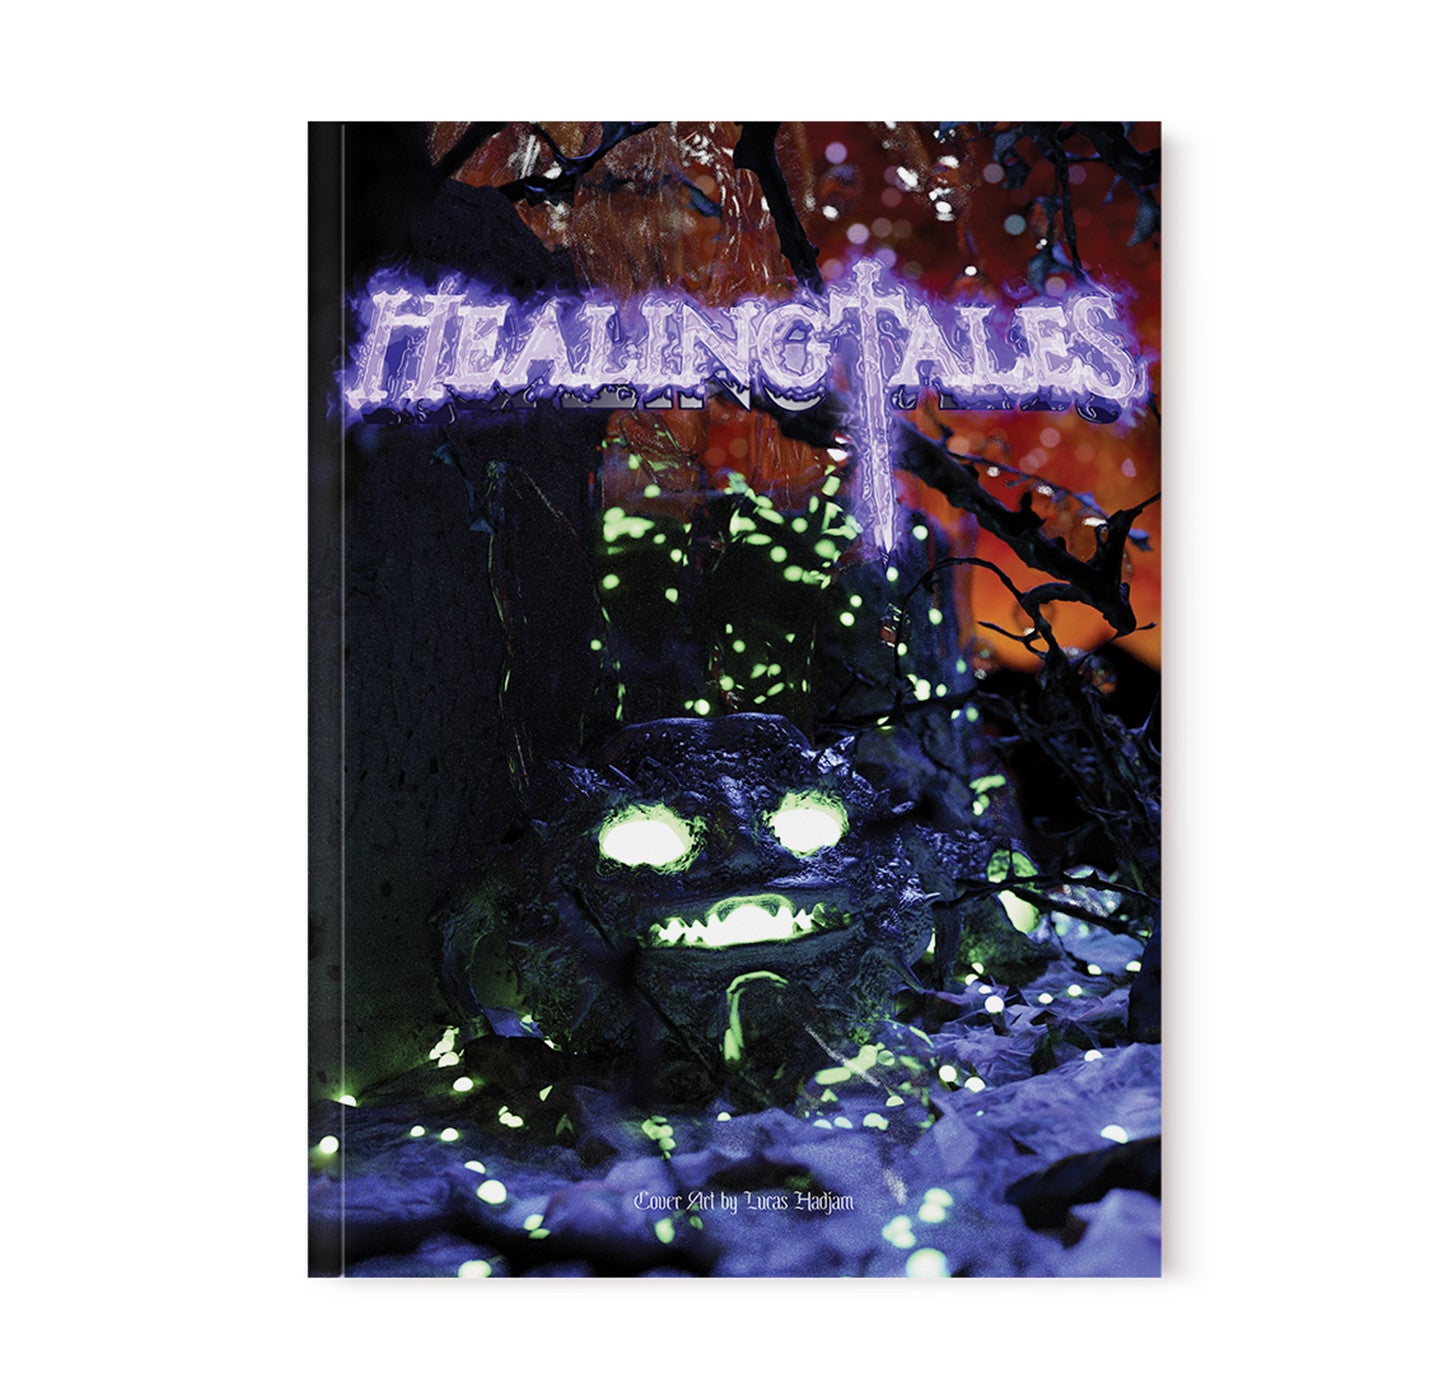 Healing Tales® Magazine - Issue 01